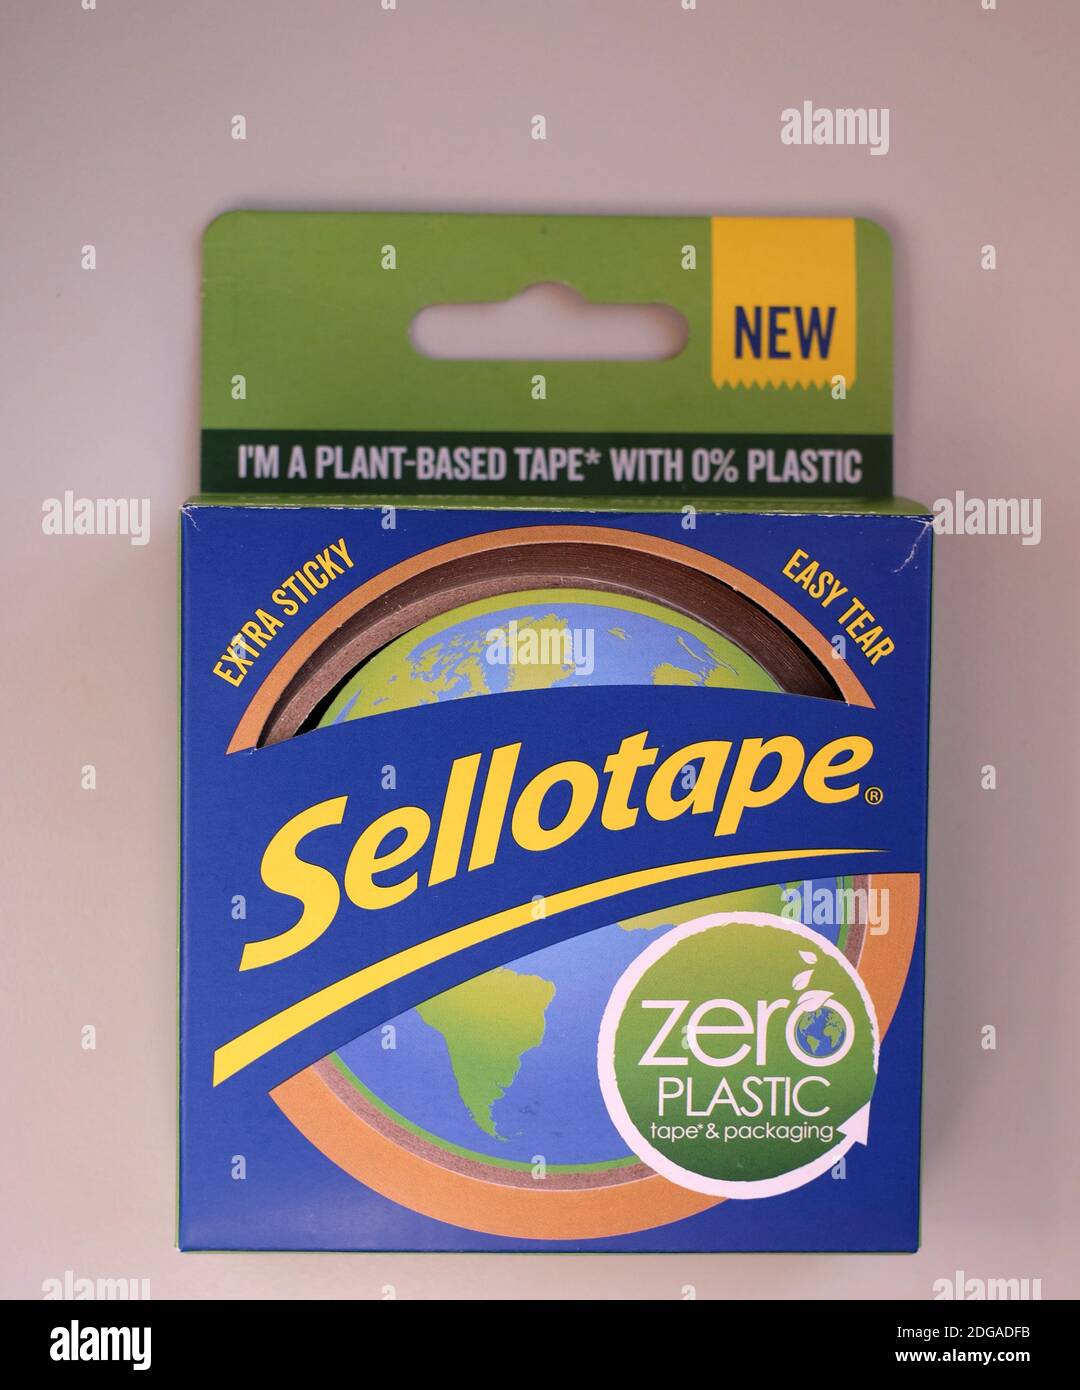 Zero Plastic Sellotape made from cellulose and natural glue. An example of  a product redesigned to be more sustainable and eco friendly Stock Photo -  Alamy